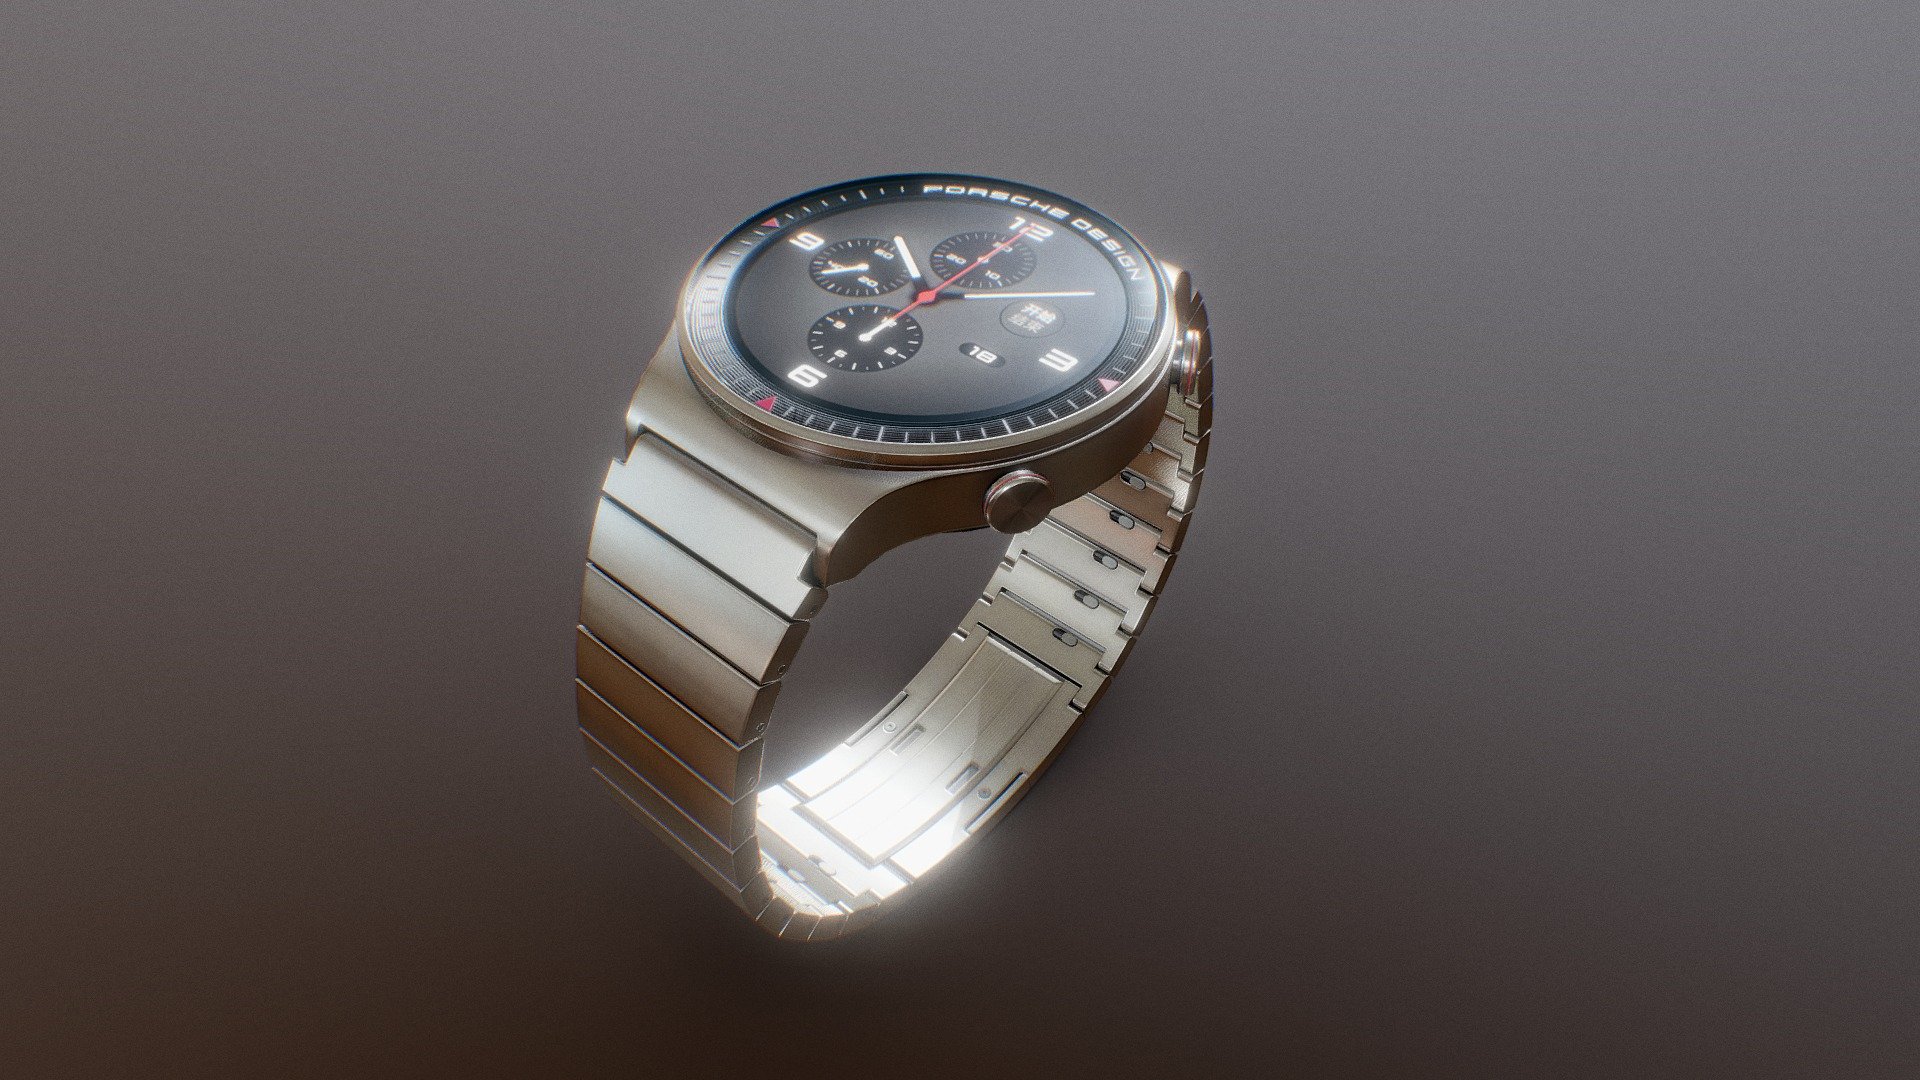 Huawei watch GT2's most striking feature is its two-week long battery life, which can be said to be one of the wearable devices with the longest battery life on the market. On the back of the meter, you can see that the heart rate sensor, metal contact charging interface, etc. are integrated in the center. Inside, there are gyroscope sensor, air pressure sensor, capacitance sensor, ambient light sensor, etc. Starting from 1388 yuan, the smart watch will be on sale on November 1, 2019 and officially on November 11, 2019 3d model